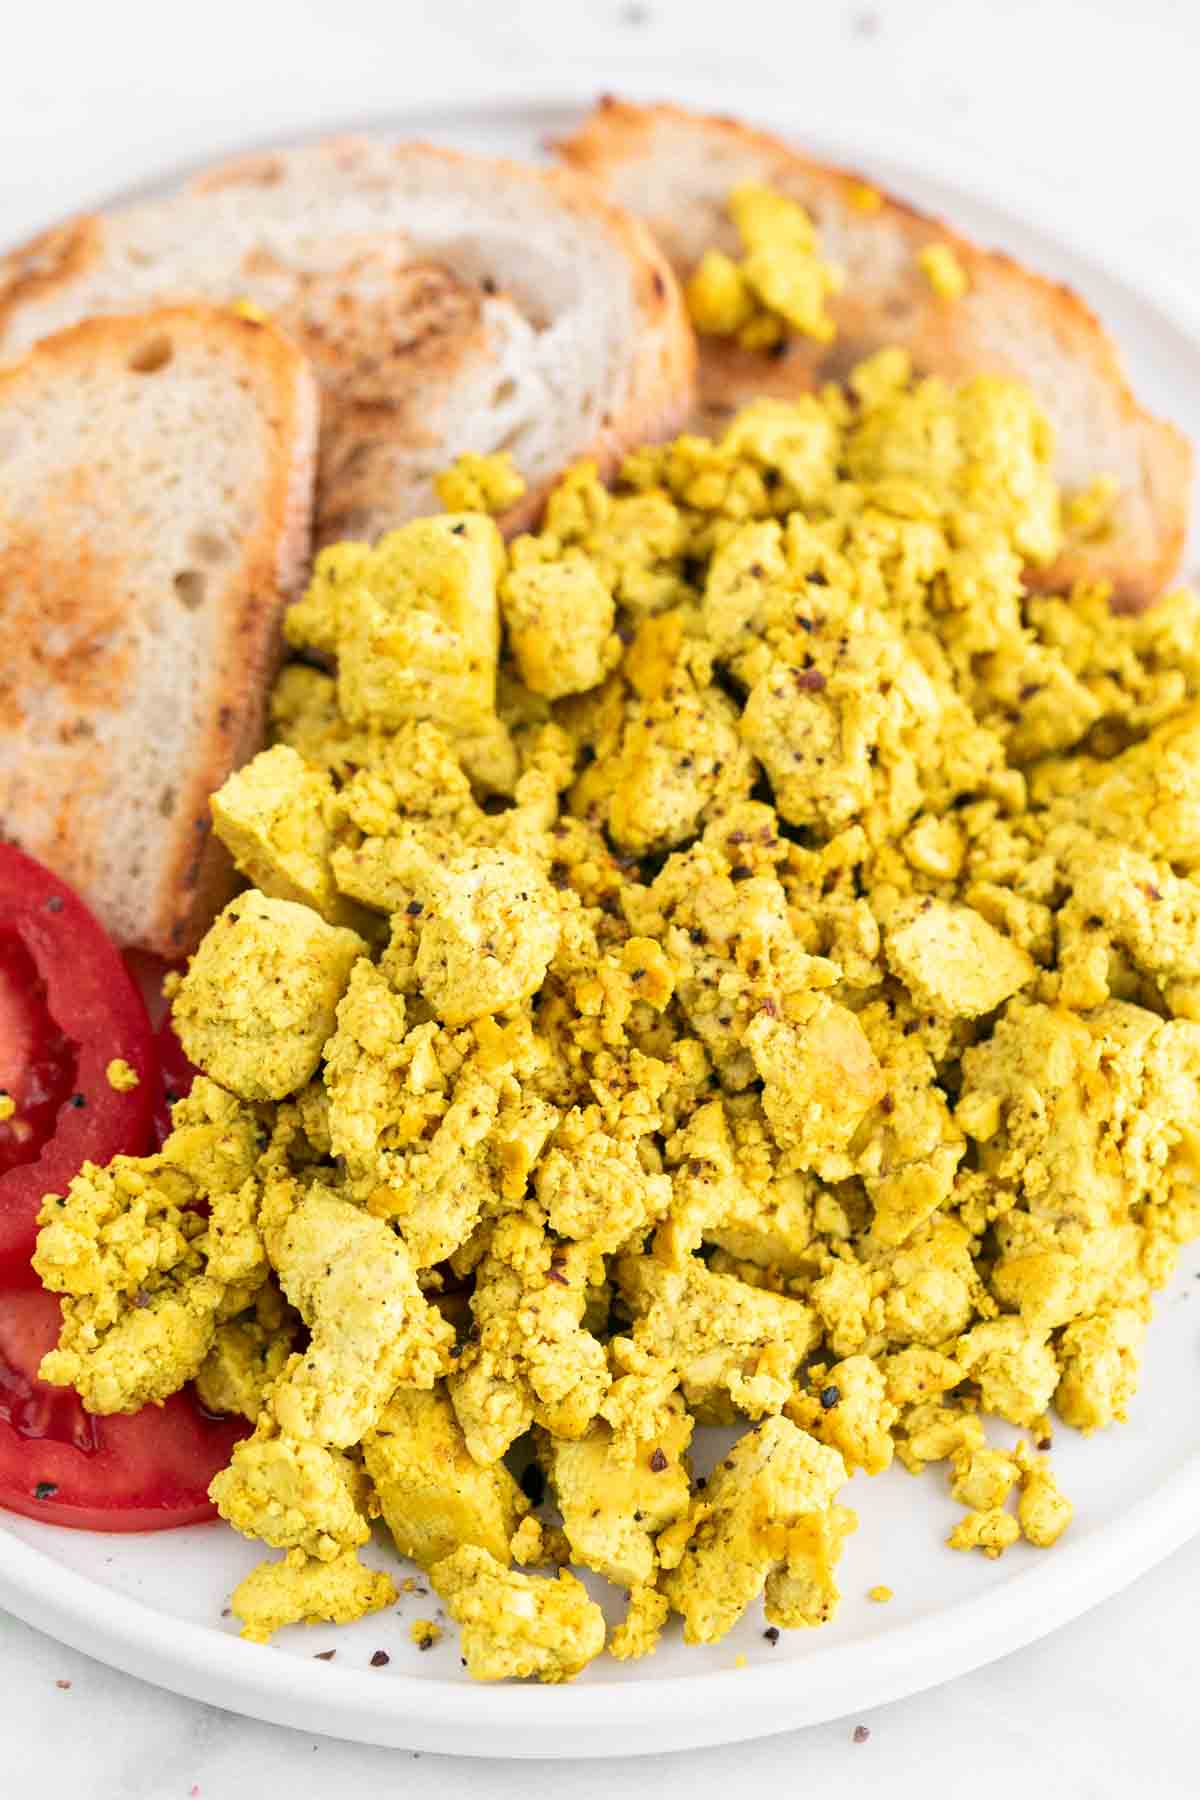 Scrambled tofu with bread and tomato on a plate.